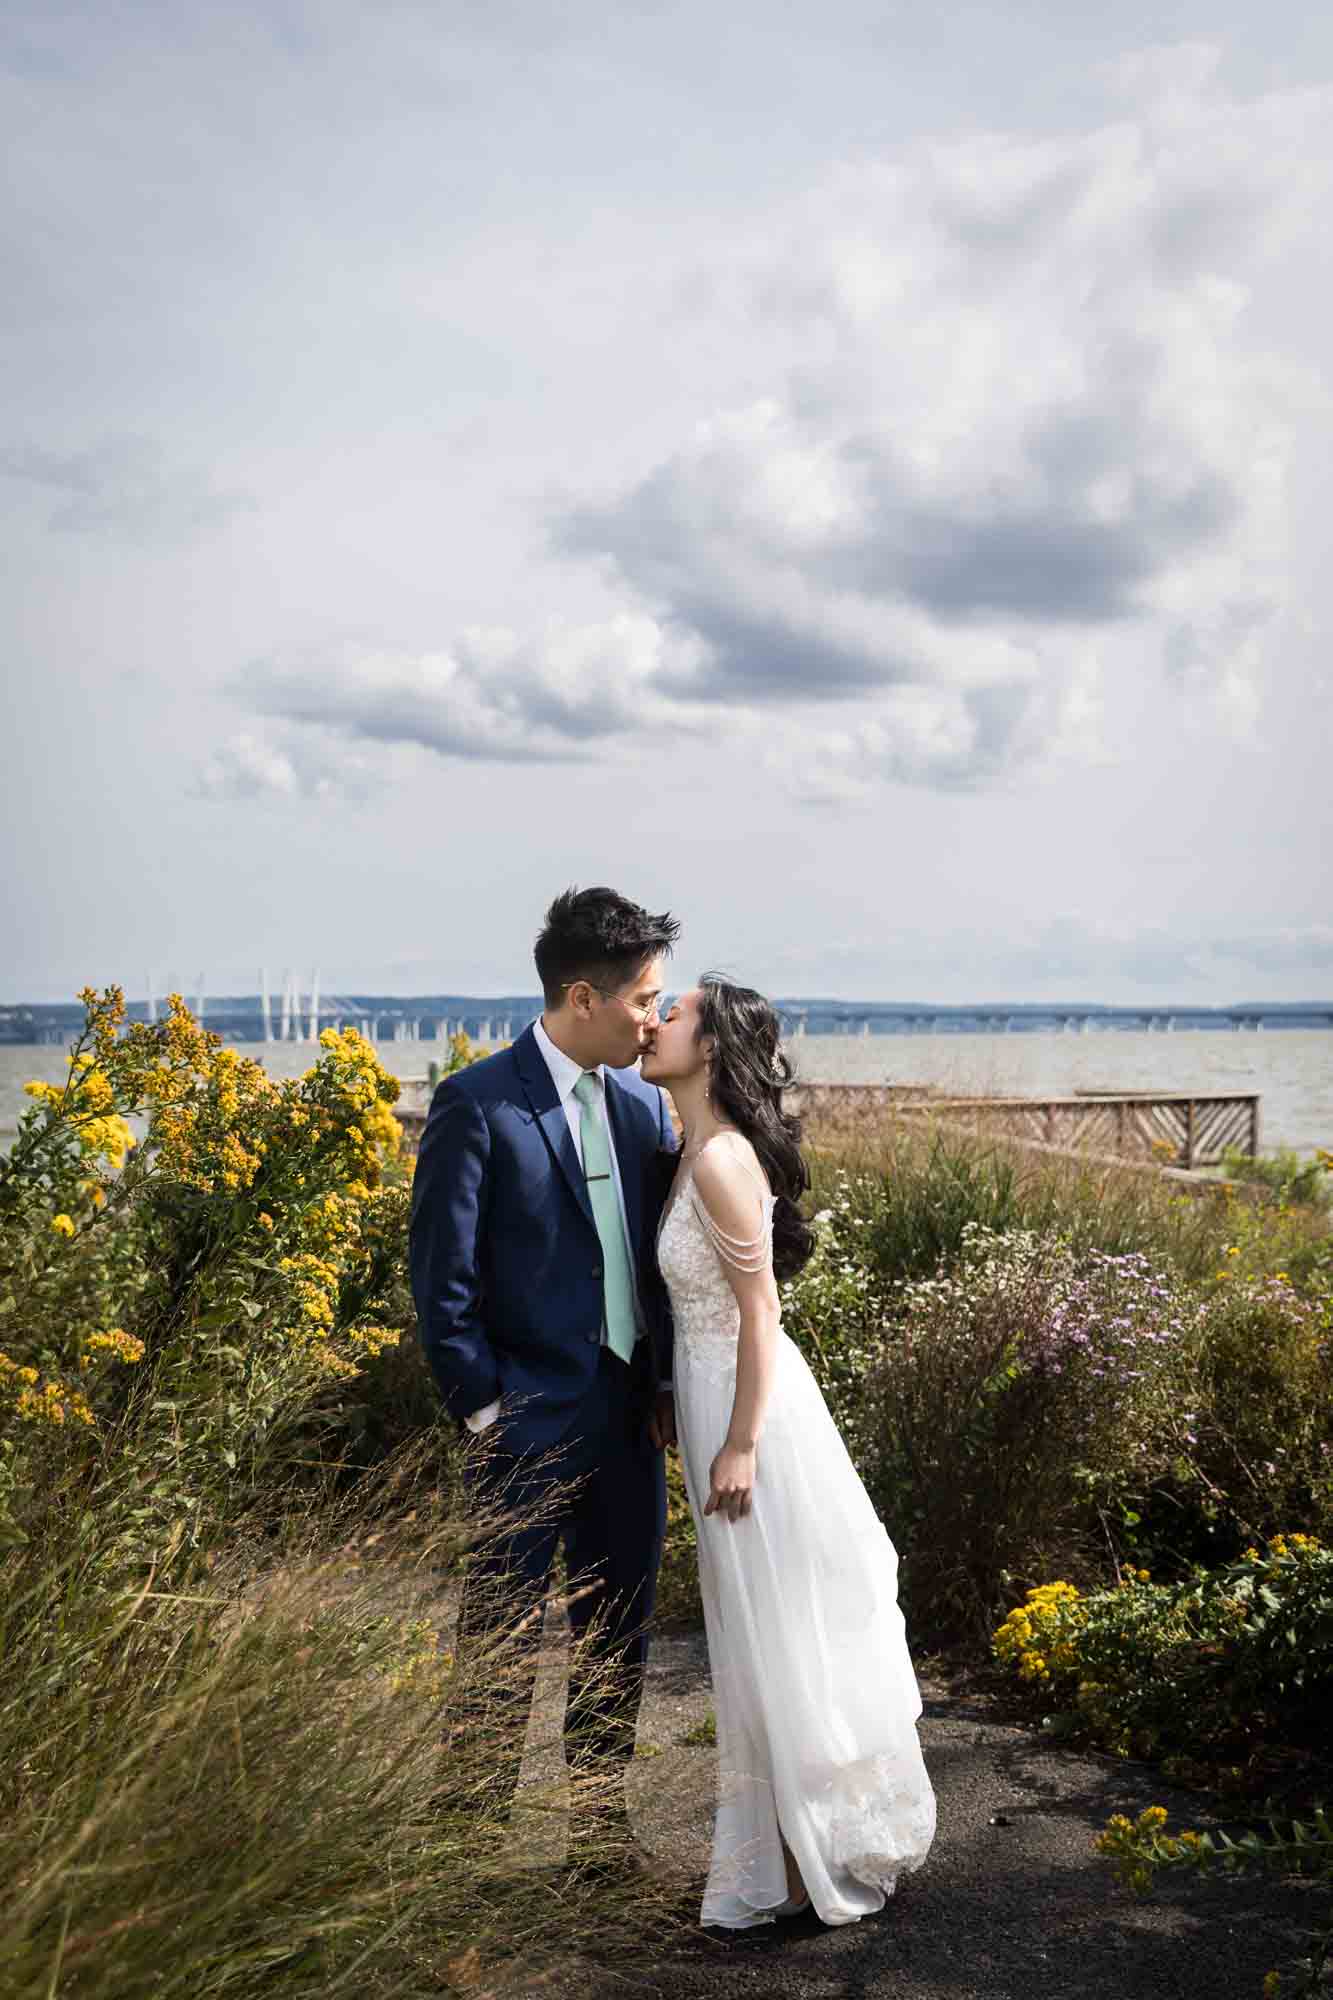 Bride and groom kissing in front of bushes with sky and clouds in background